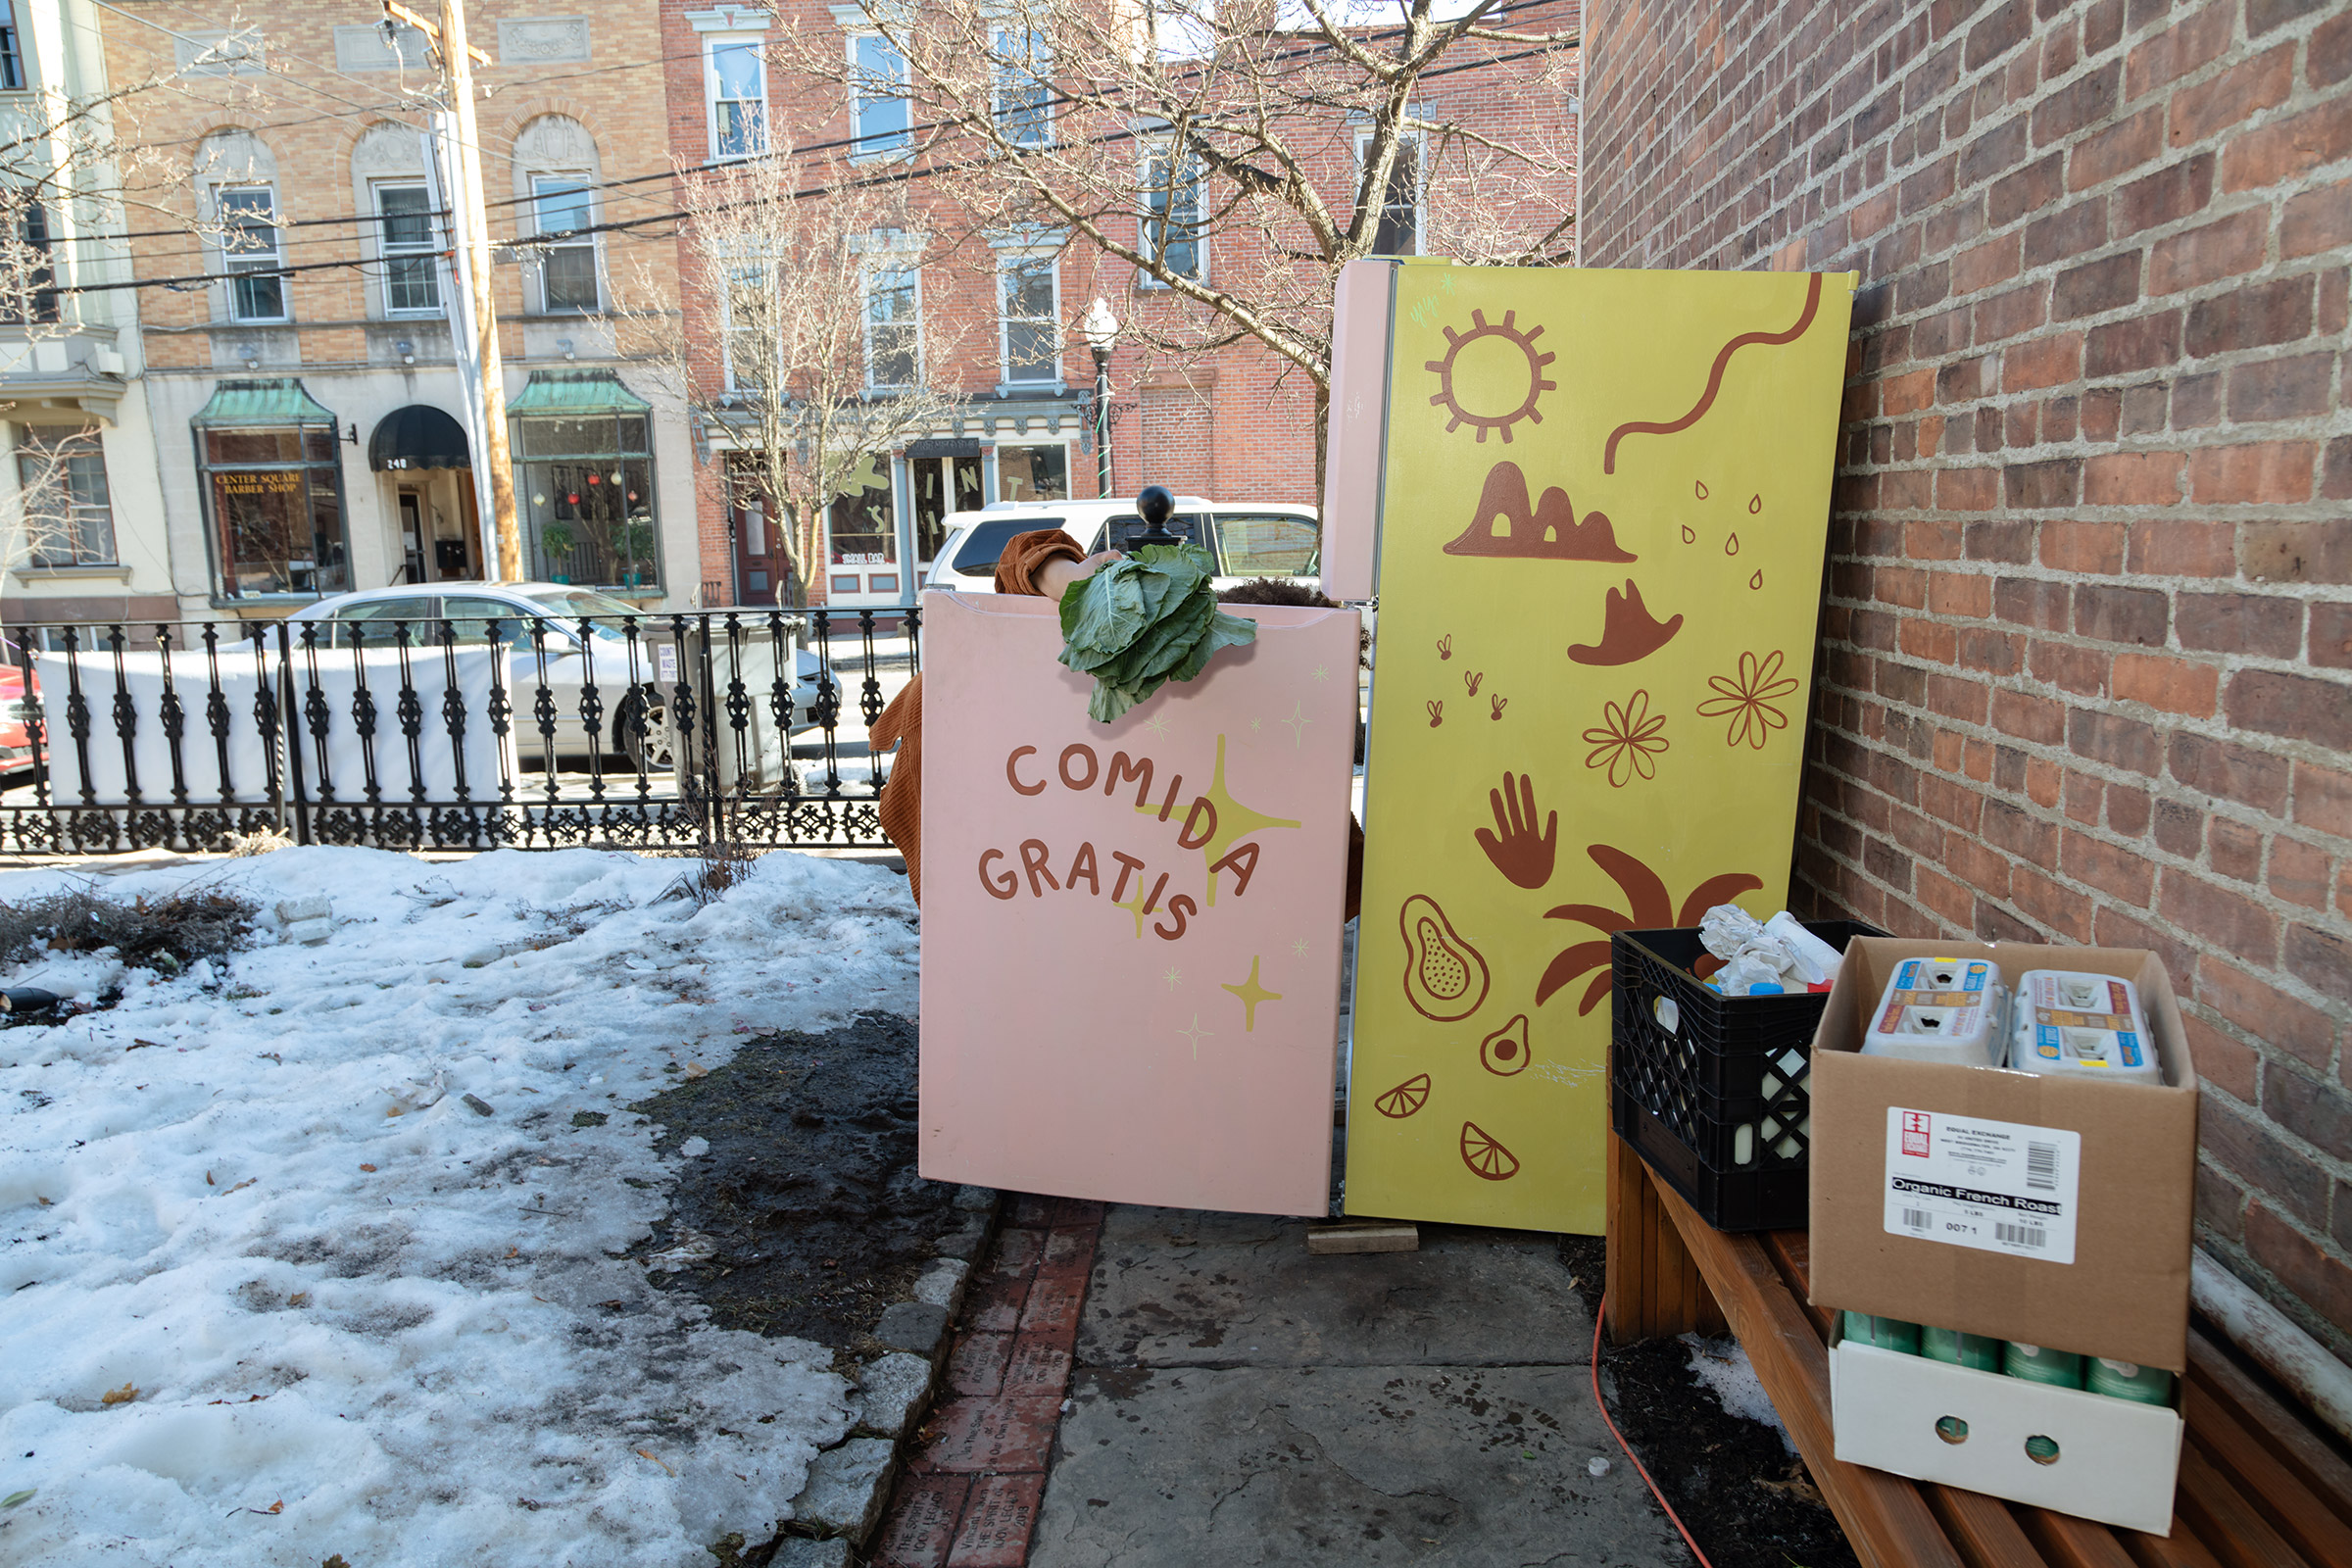 Anderson commissions local artists to decorate her fridges. This one on Lark Street was painted by a local kombucha vendor